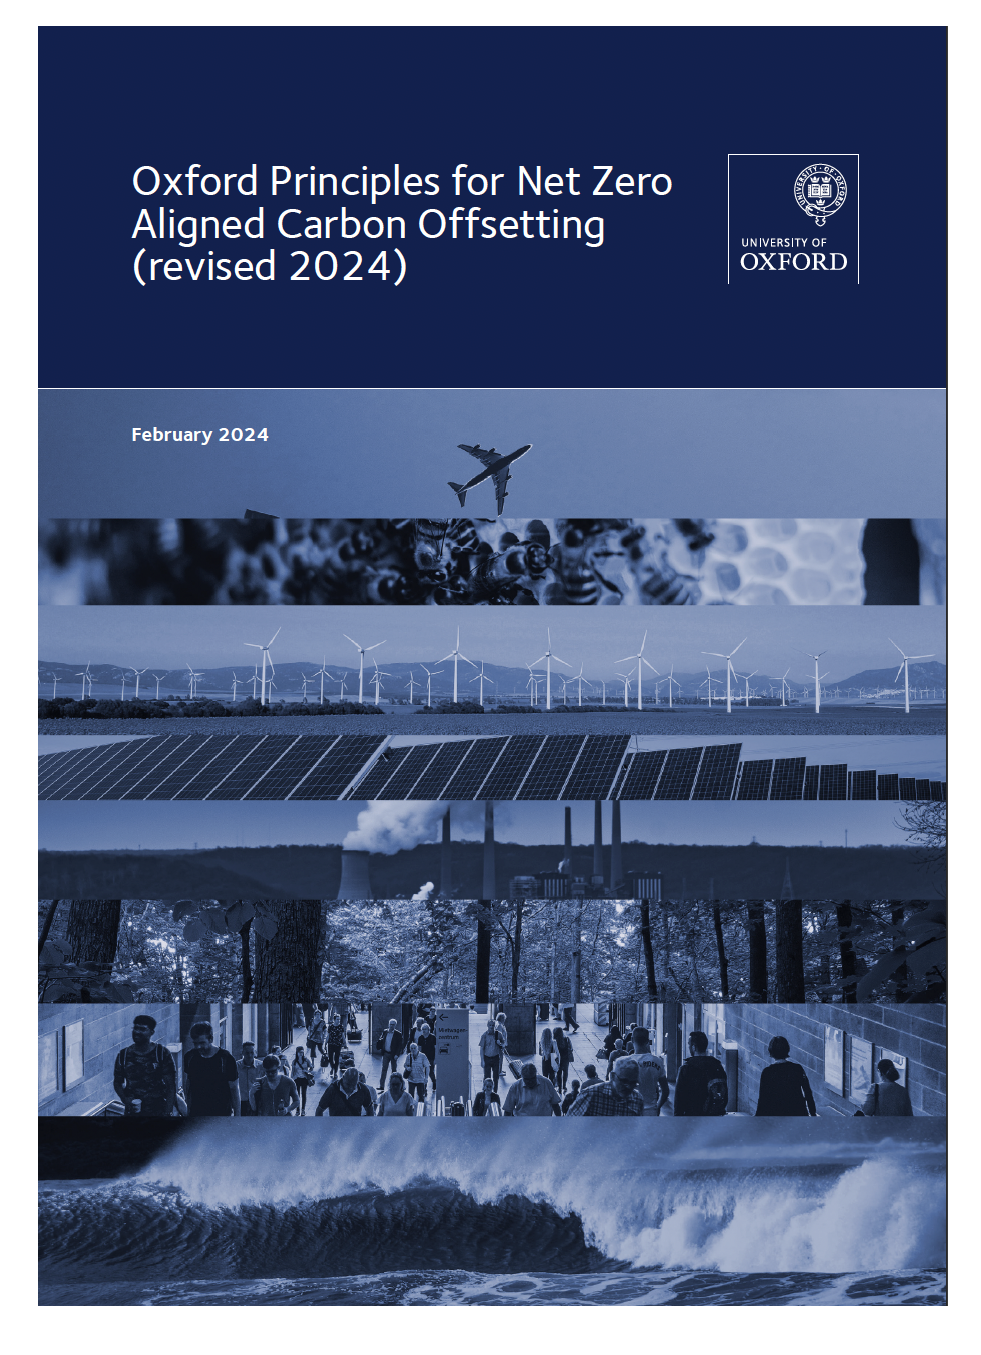 Cover of the updated principles with windfarms, nature, and plane